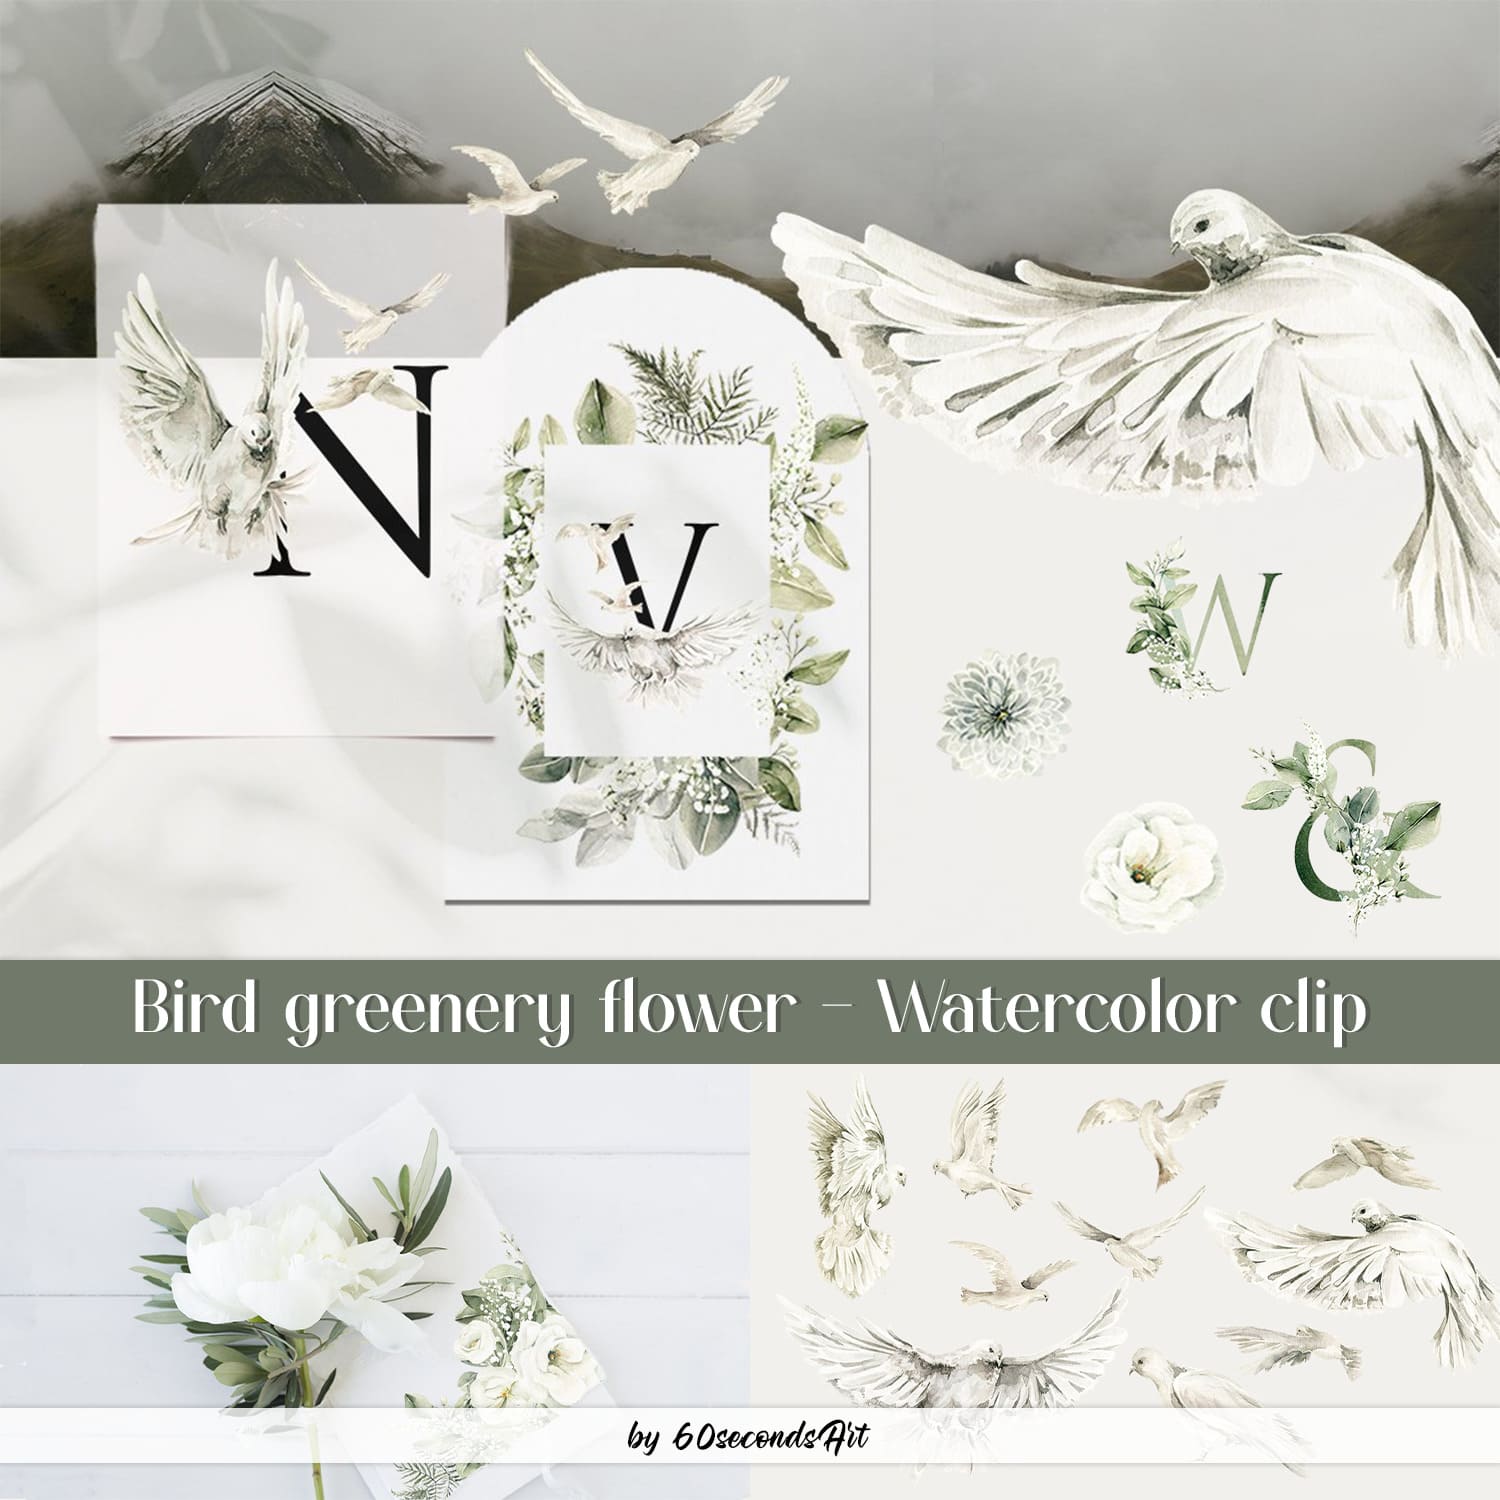 bird greenery flower watercolor clipart collection.